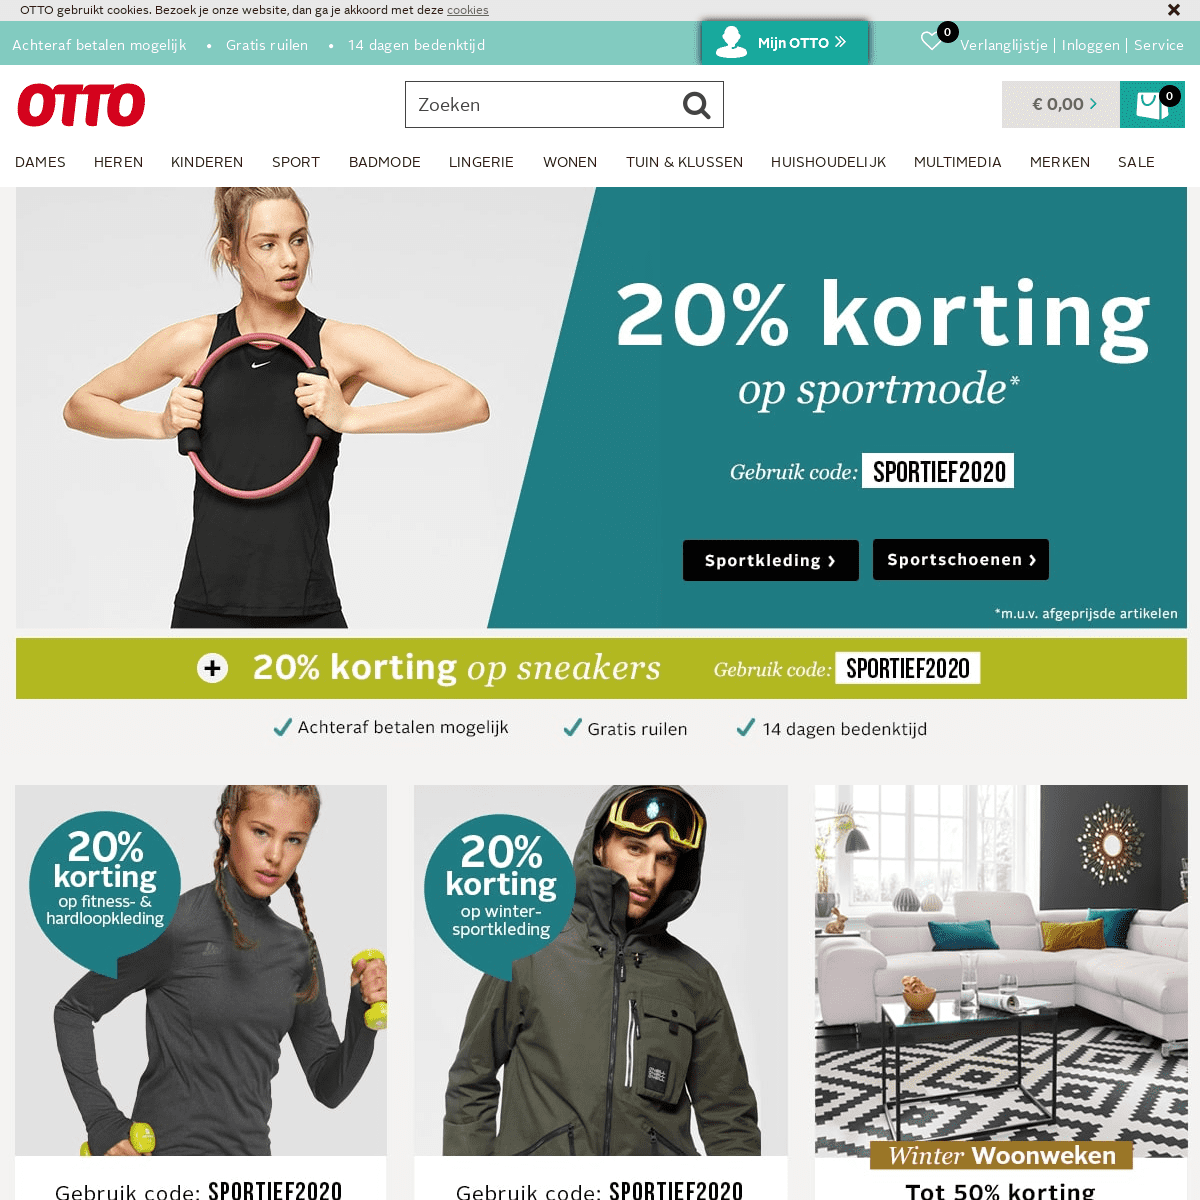 A complete backup of otto.nl